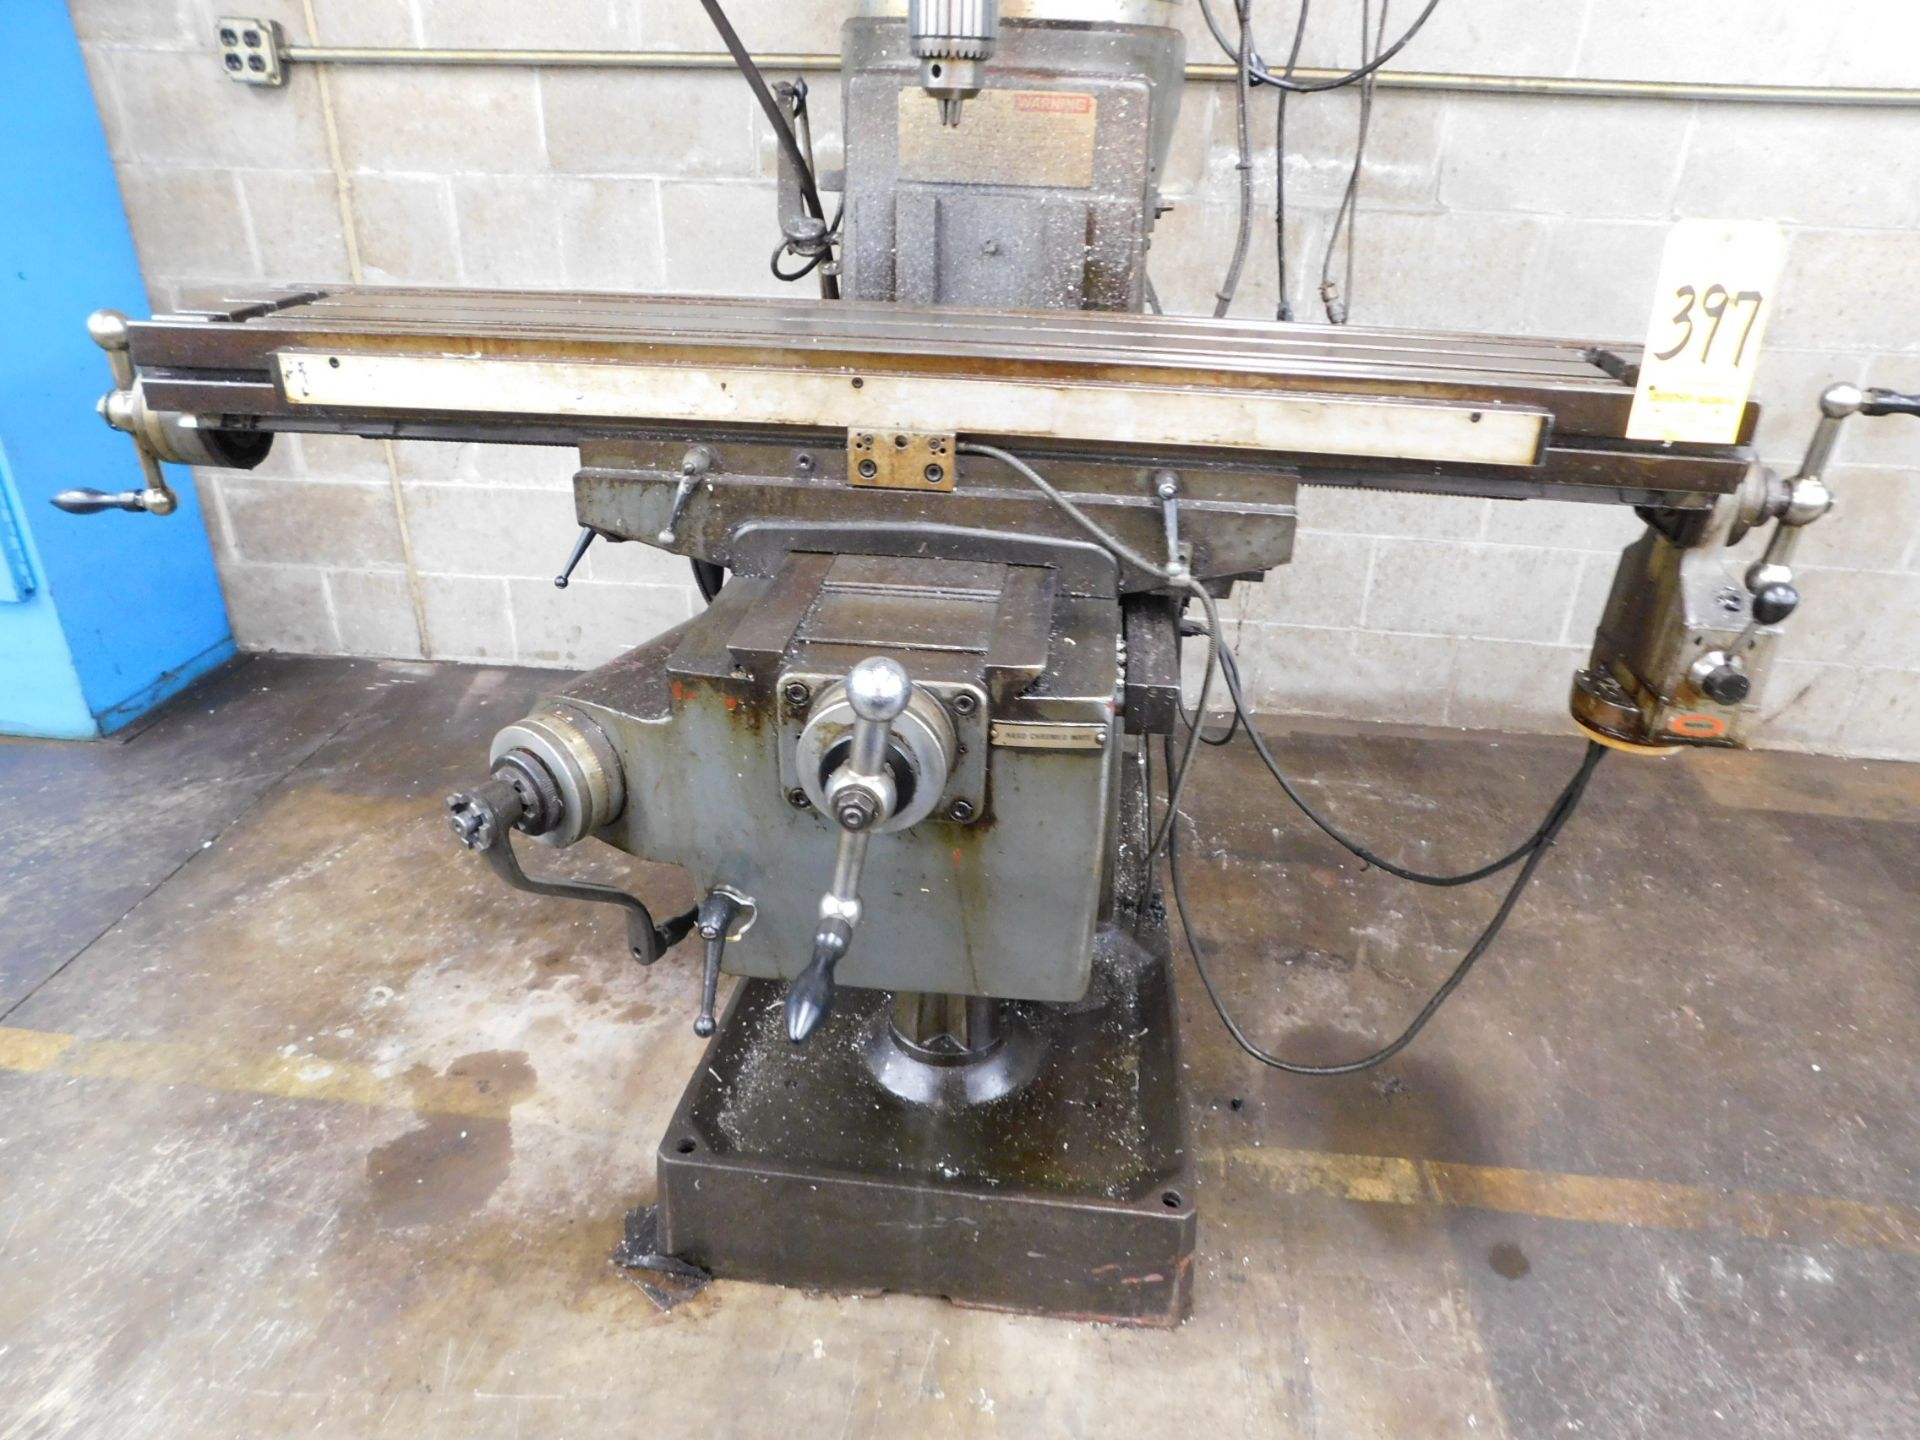 Lagun Model FTV-2 Vertical Mill, s/n SE17835, Variable Speed, 3 HP, R-8 Spindle, 9” X 48” Table, - Image 4 of 11